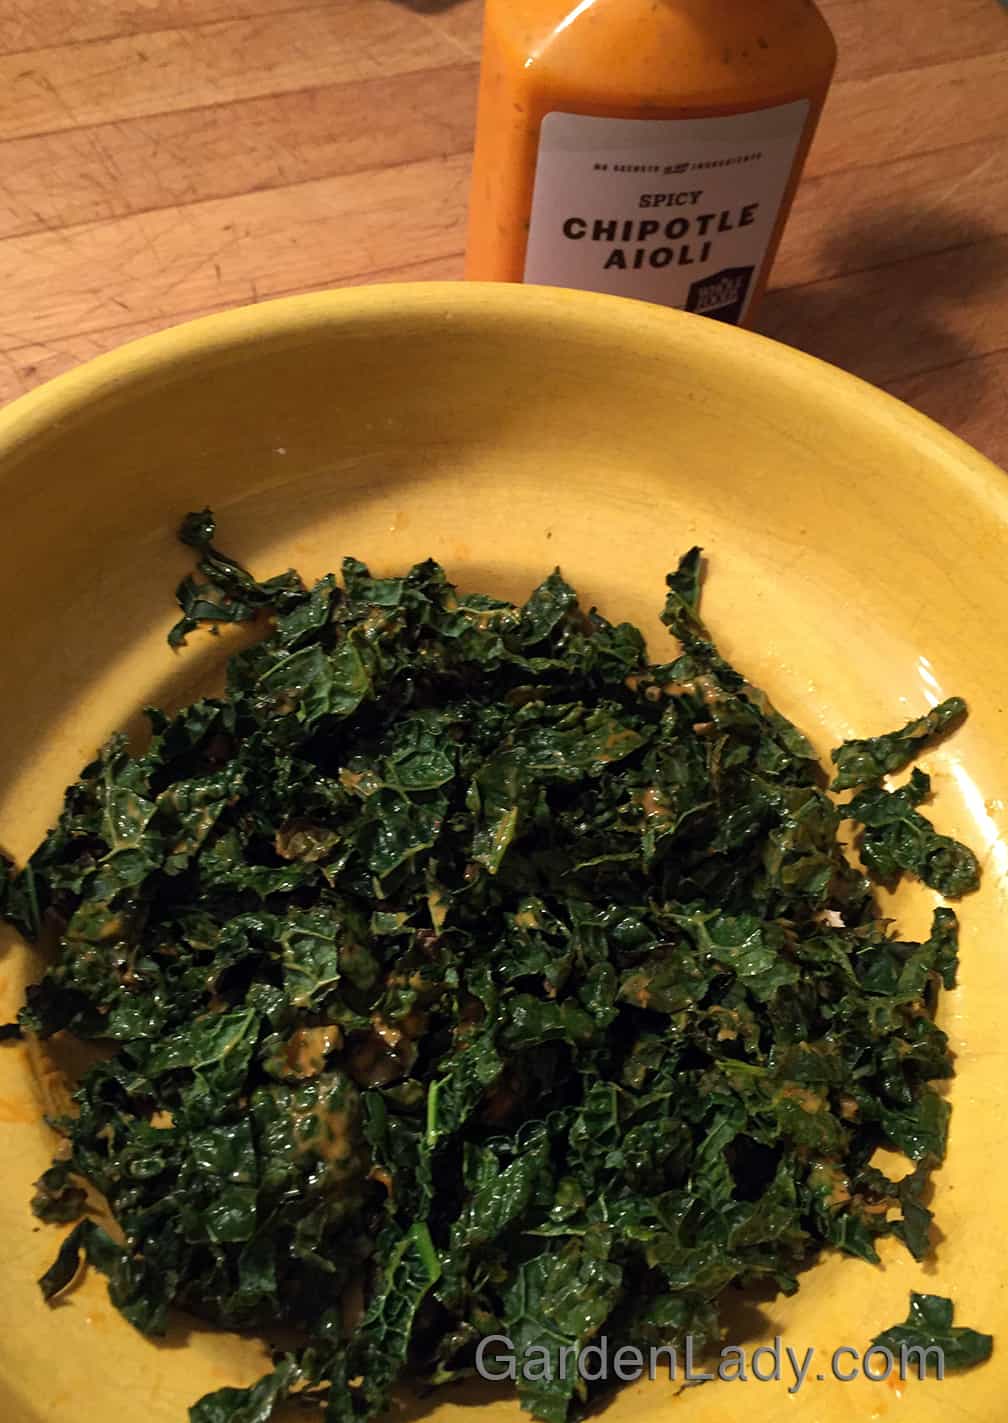 Toss with the dressing of your choice but be sure not to use too much. You want the dressing to slightly moisten the kale, and to add flavor, but not to overwhelm it.